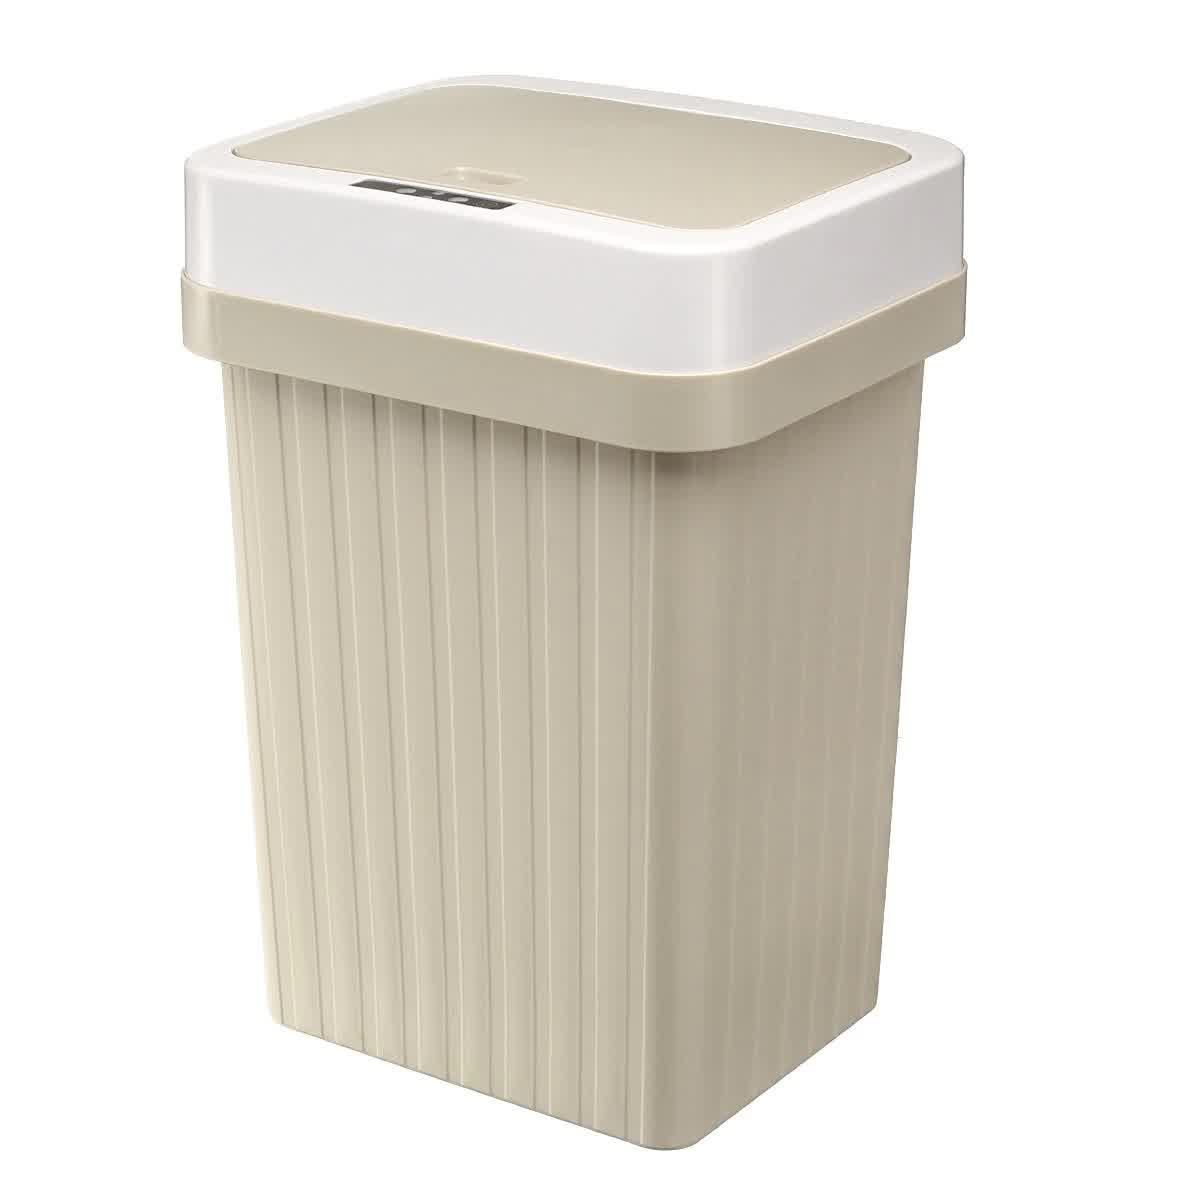 16L Smart Trash Can Automatic Sensor Dustbin USB Rechargeable Induction Waste Bin Rubbish Can Home Living Room Garbage Bucket